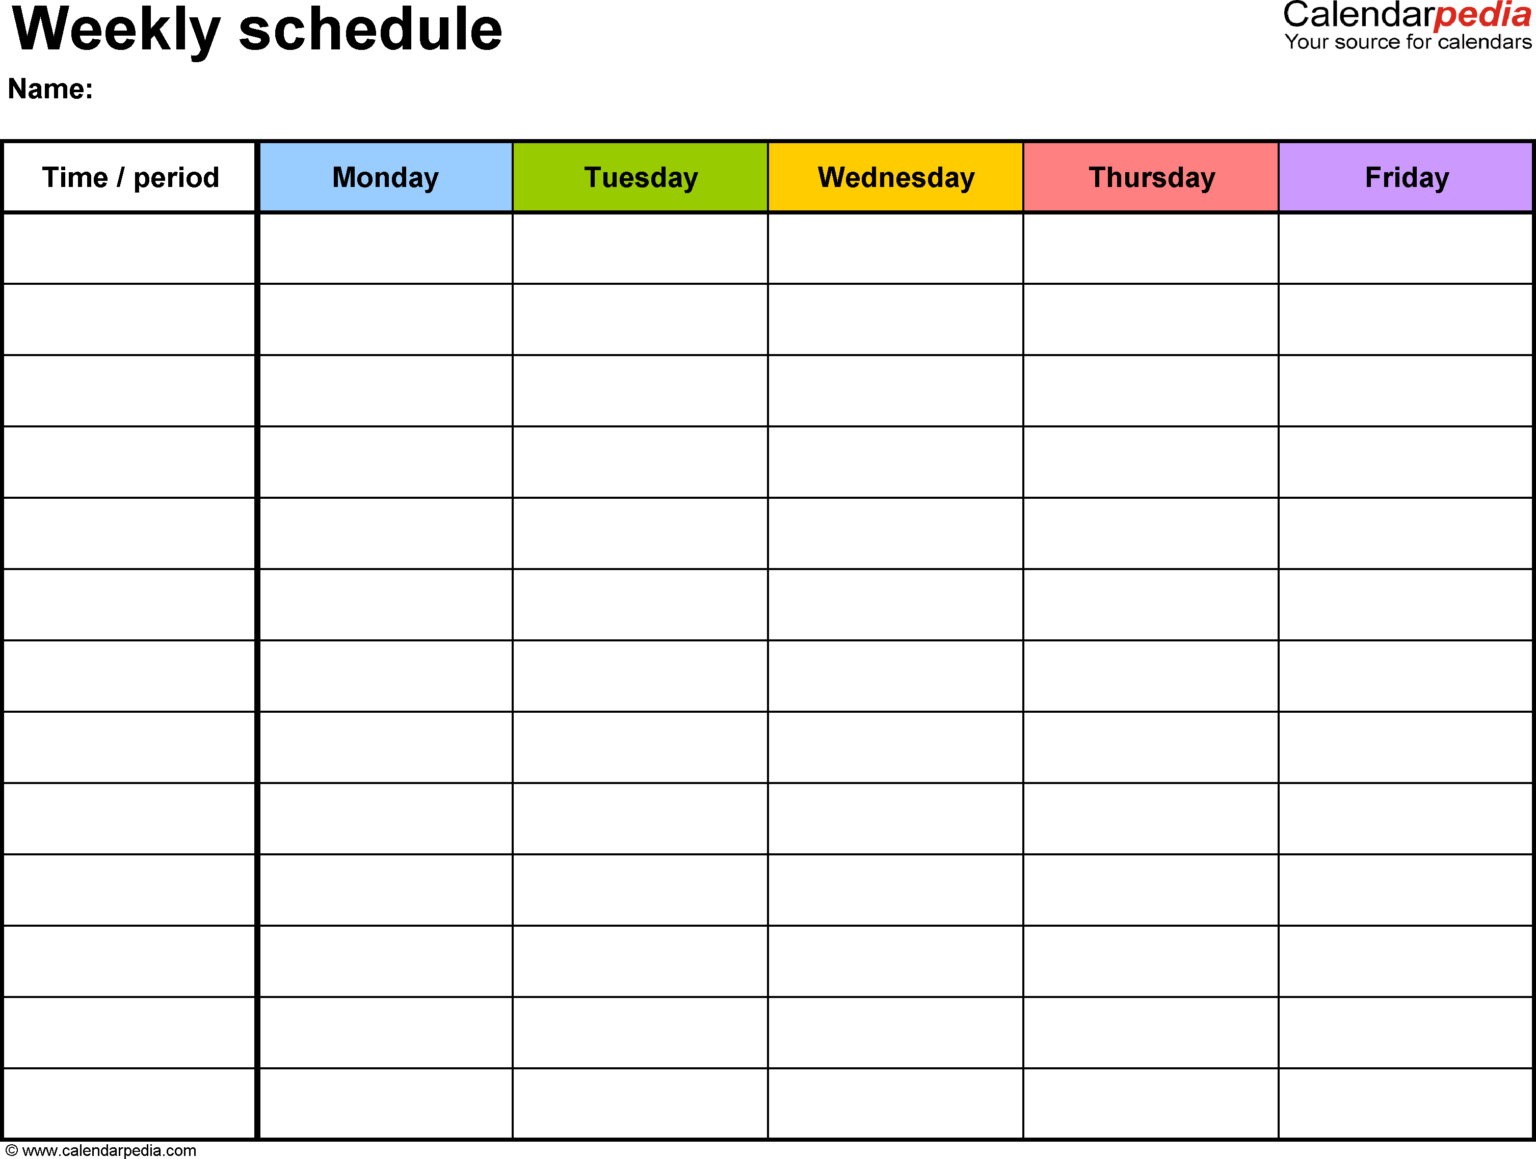 free-weekly-schedule-templates-for-excel-18-templates-throughout-appointment-sheet-template